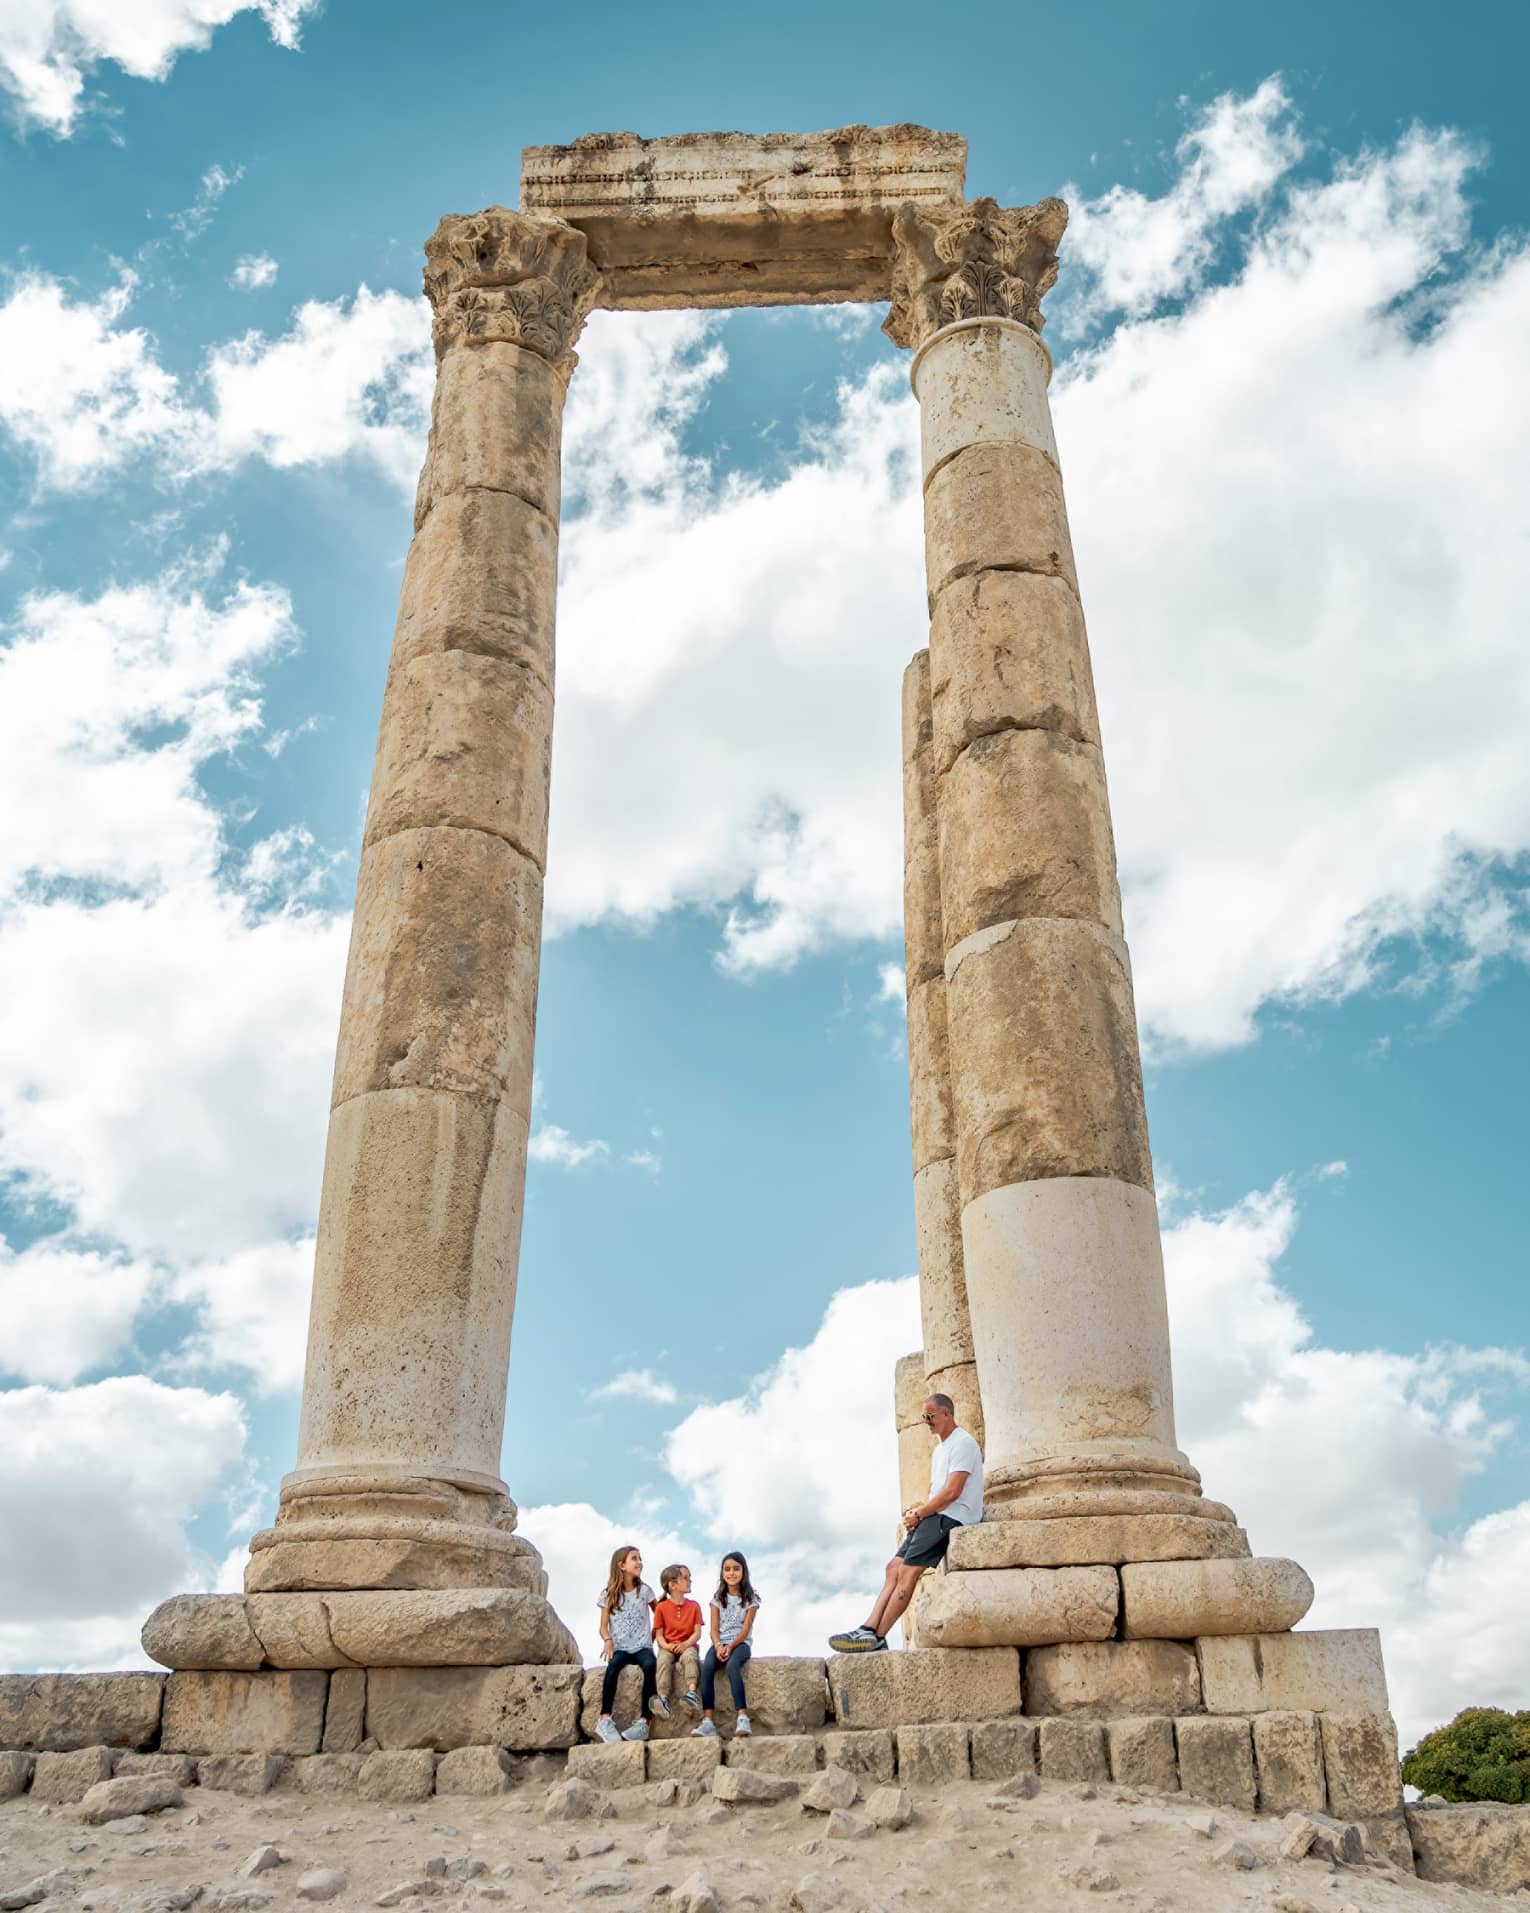 A family sitting in the center of a set of stone pillars in front of a blue sky.